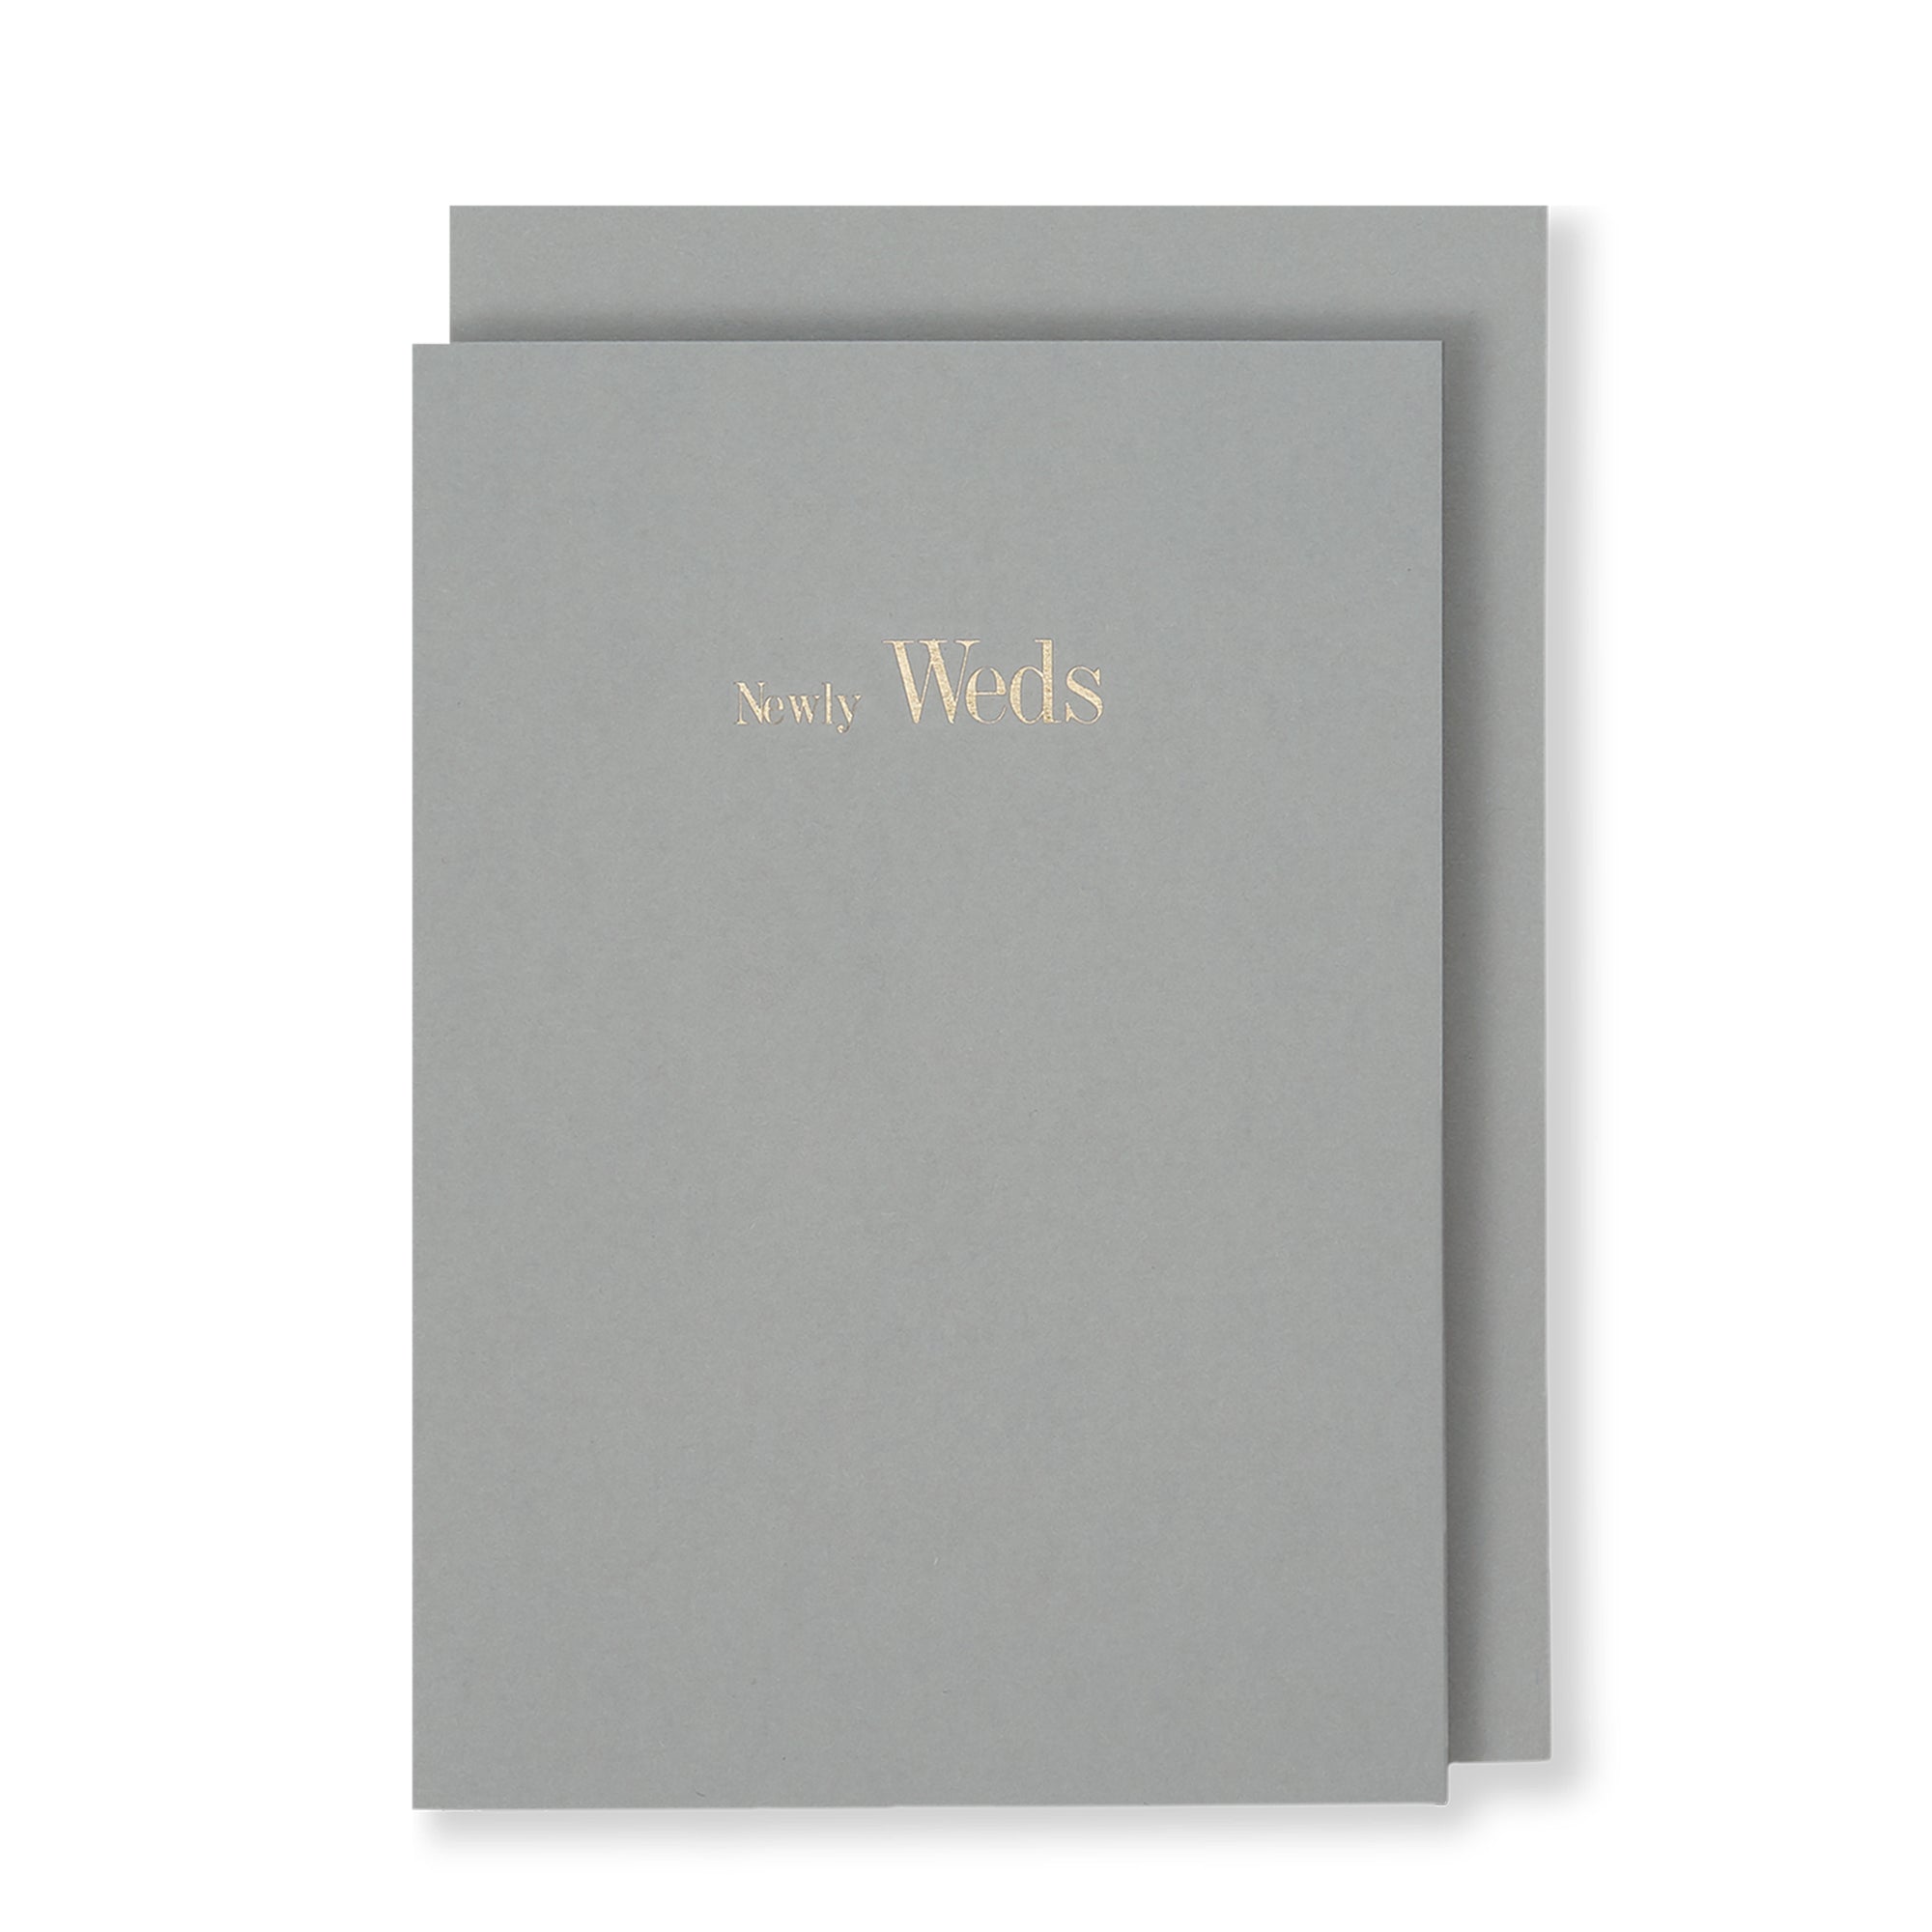 Newly Weds Greeting Card in Grey, Front